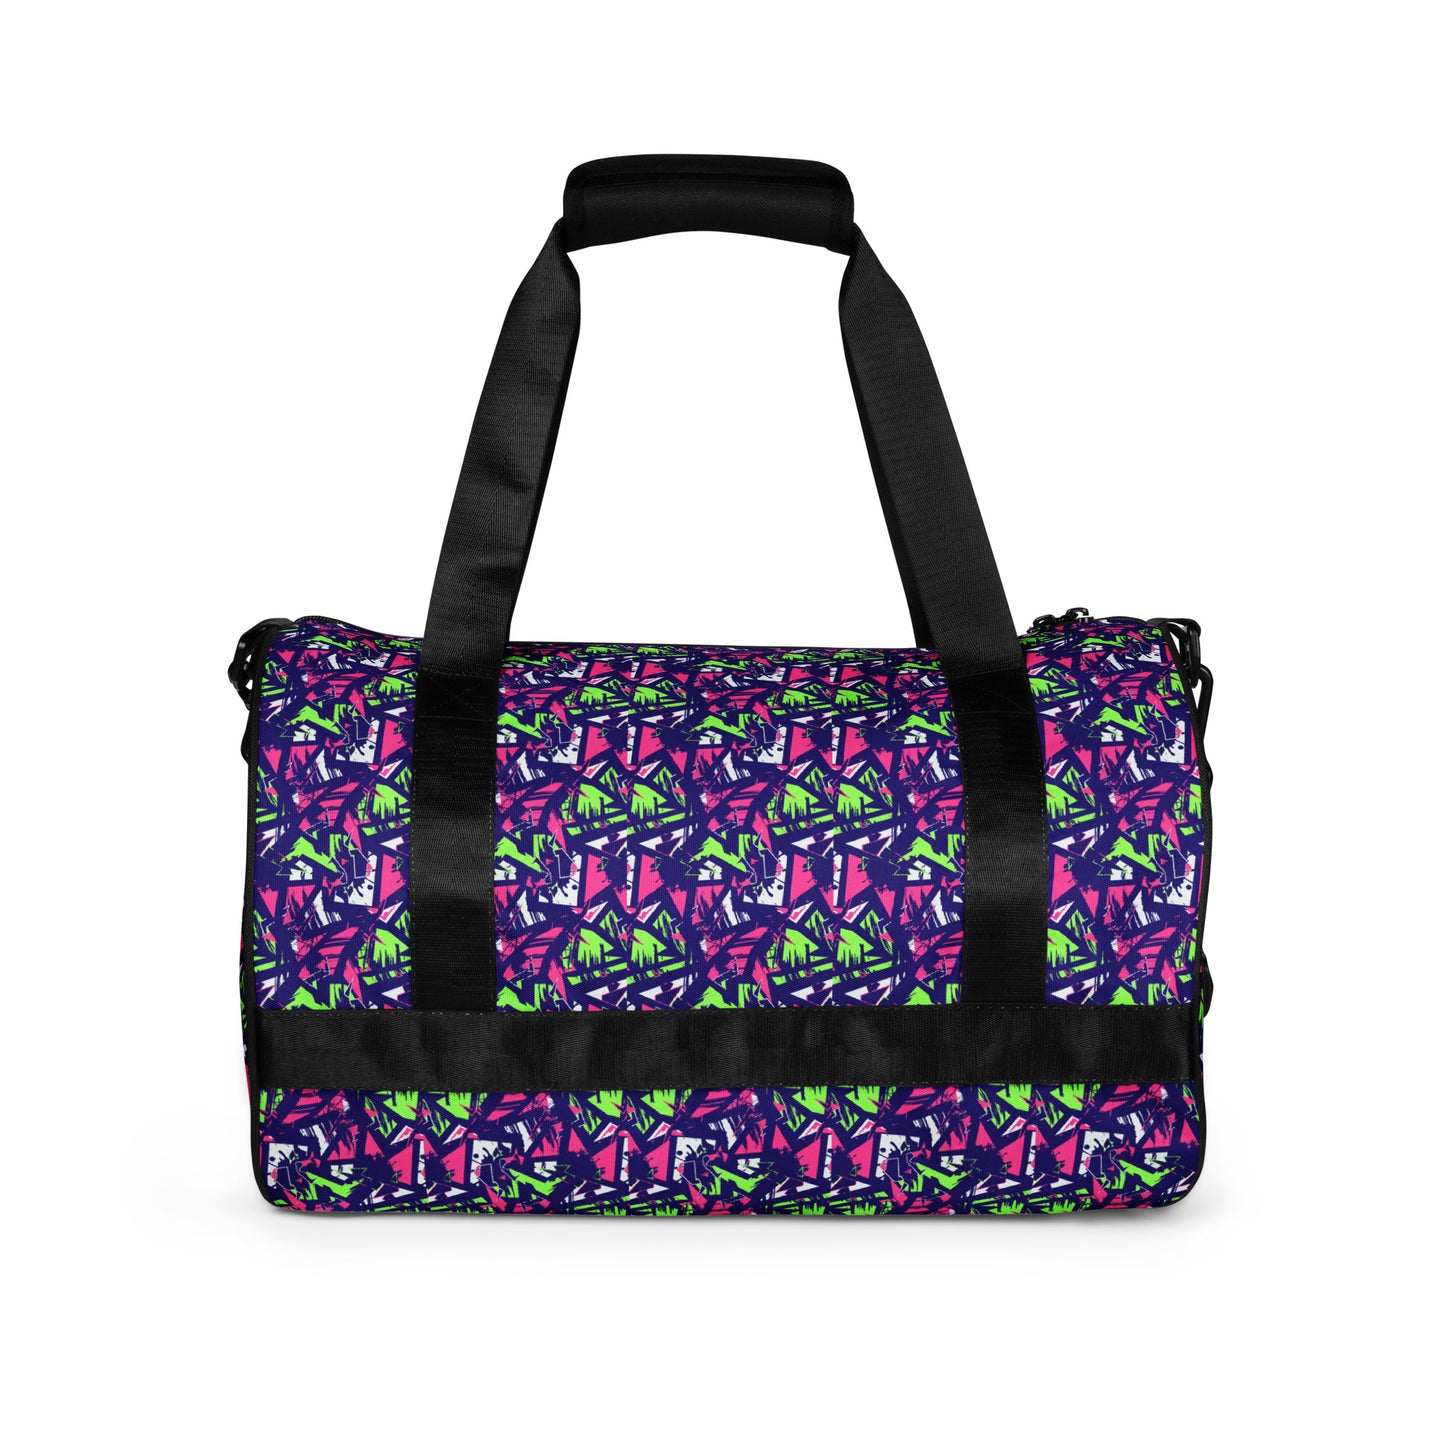 Niccie's Sports Pattern All-Over Print Gym Bag